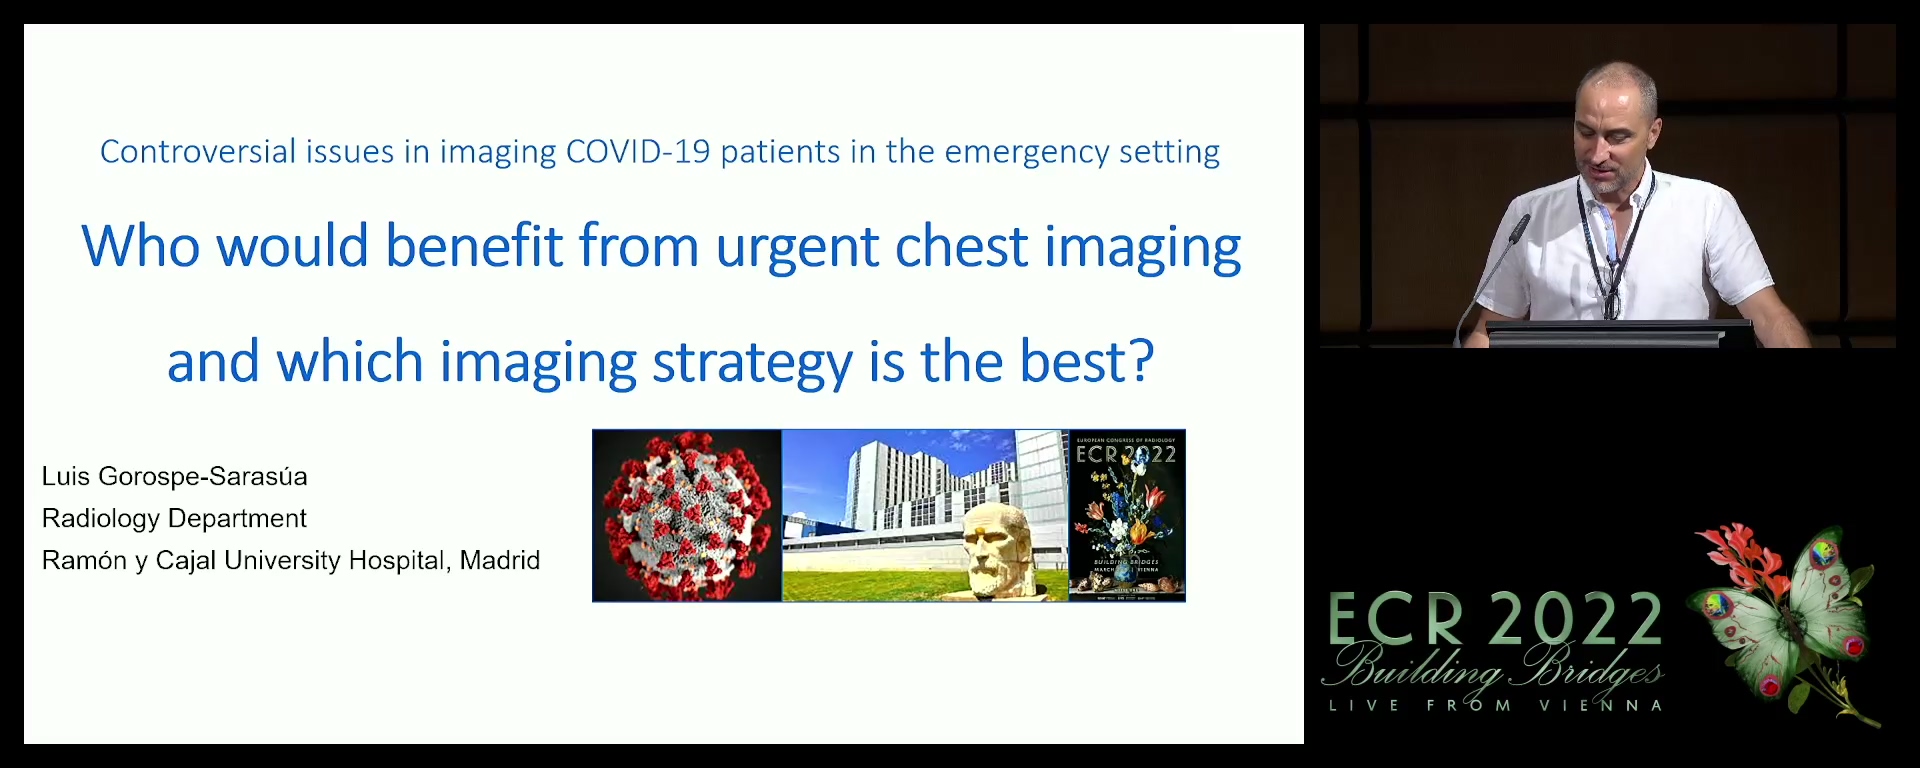 Who would benefit from urgent chest imaging and which imaging strategy is the best?